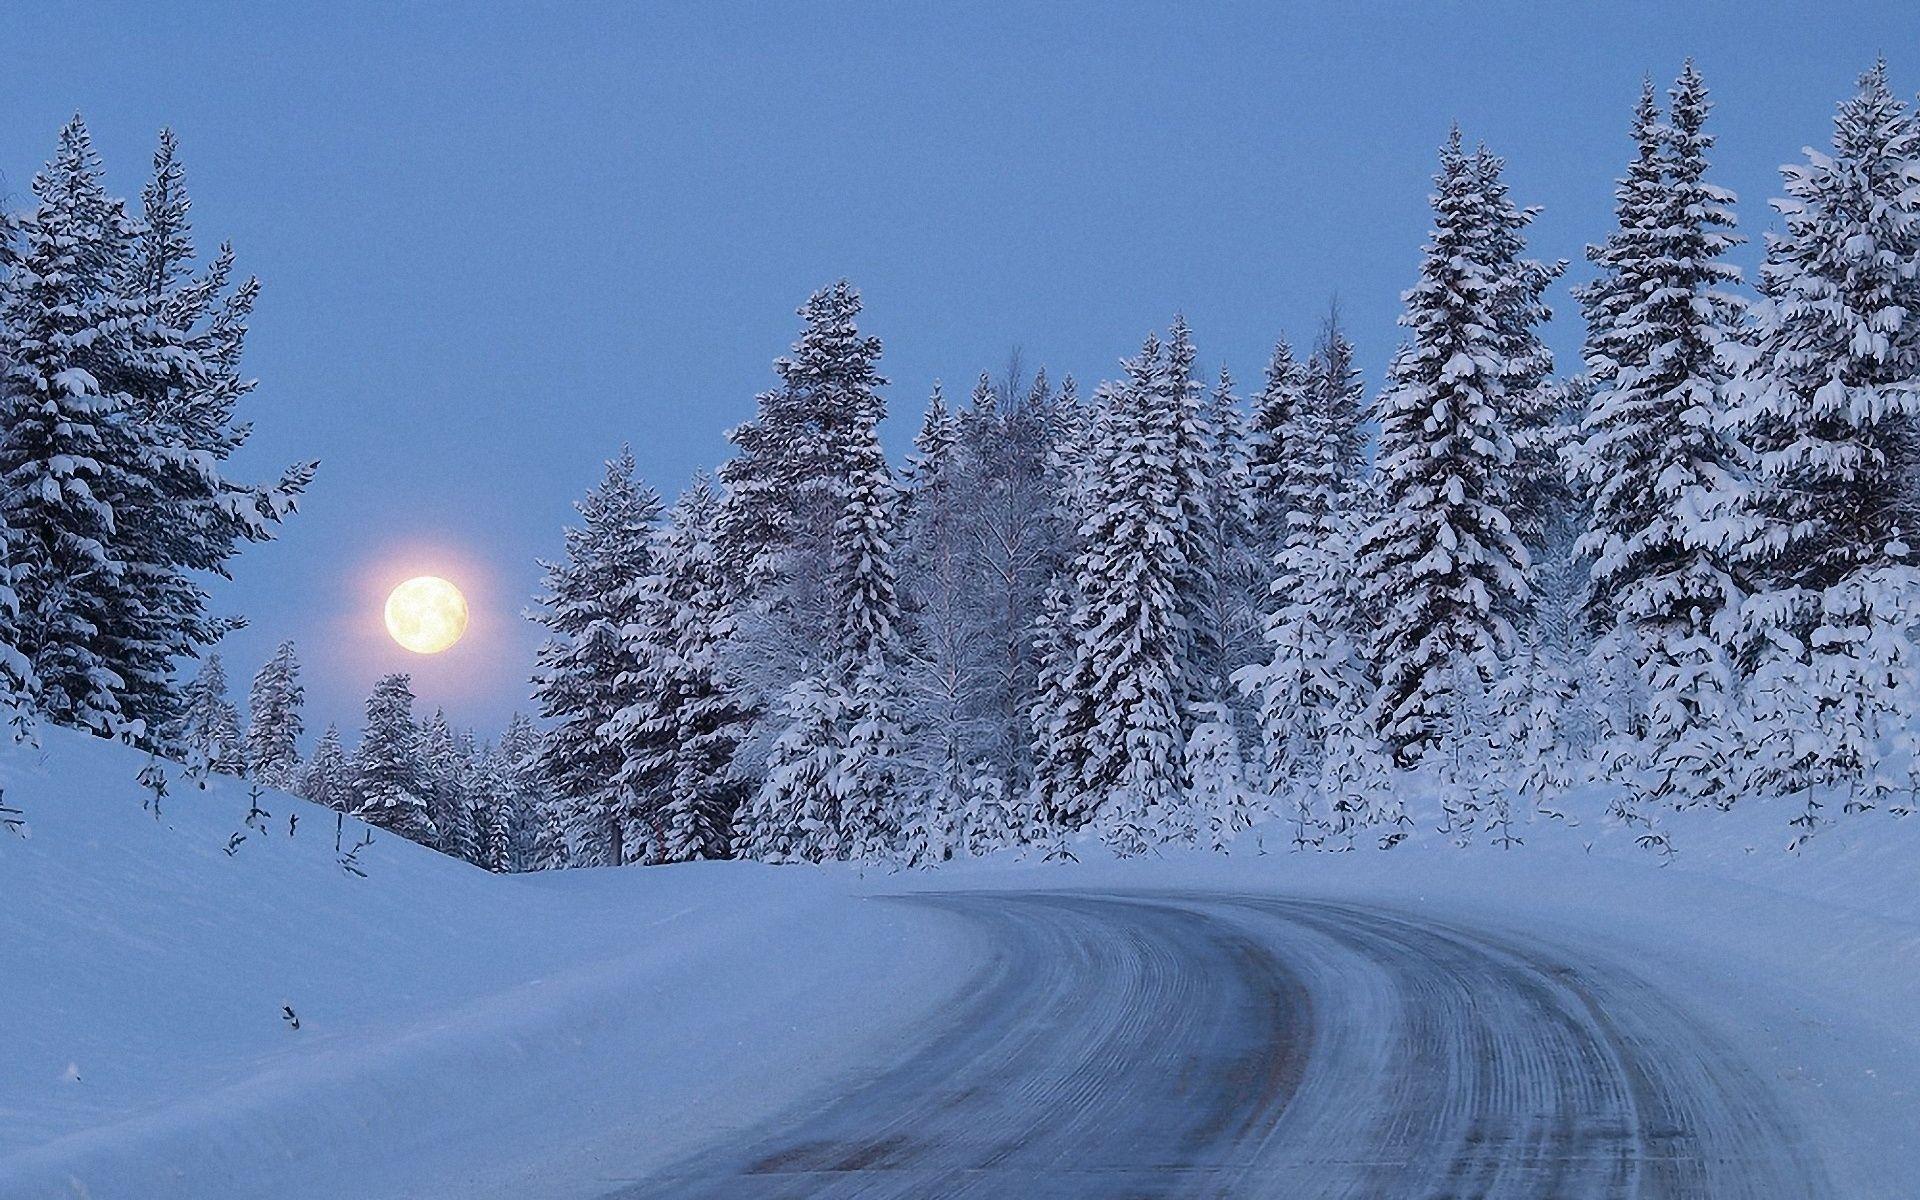 Snowy Forest Road Moon Night wallpaper. Snowy Forest Road Moon